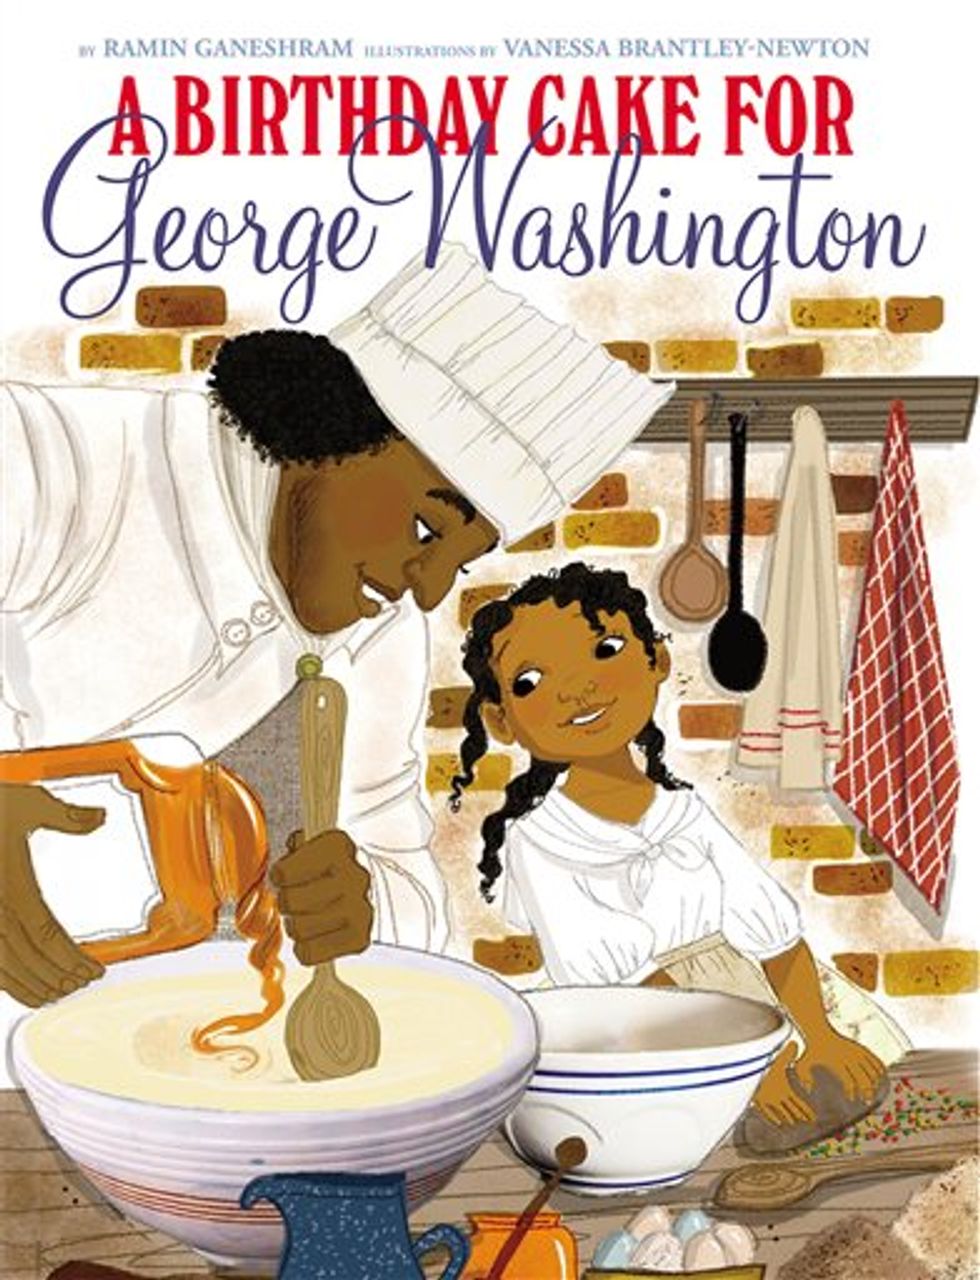 George Washington Children's Book Ban a Slippery Slope of Extremism